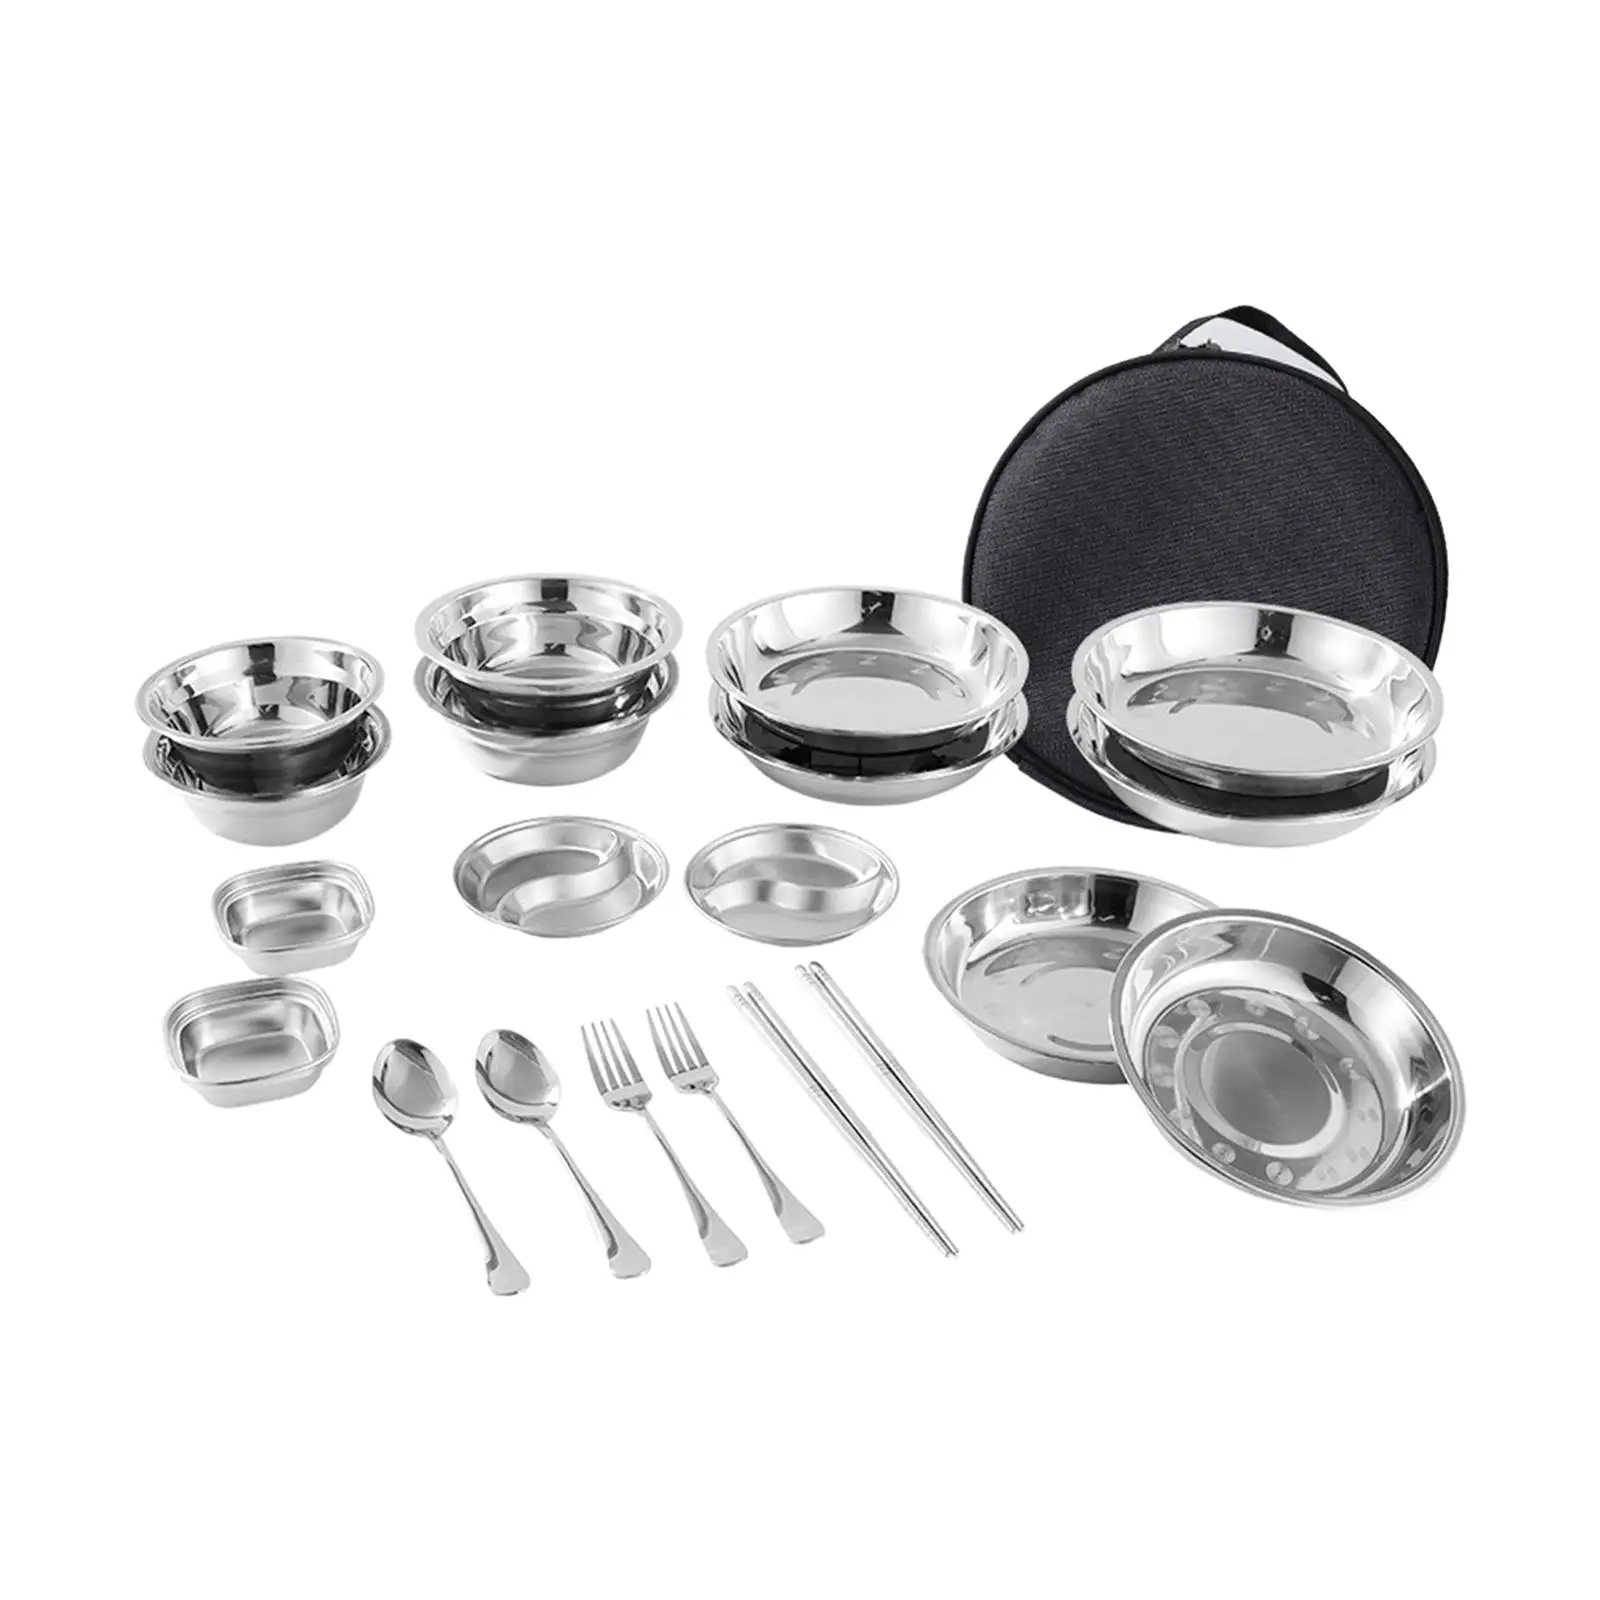 Stainless Steel Plates and Bowls Dinner Plate for Party Outdoor Use Beach